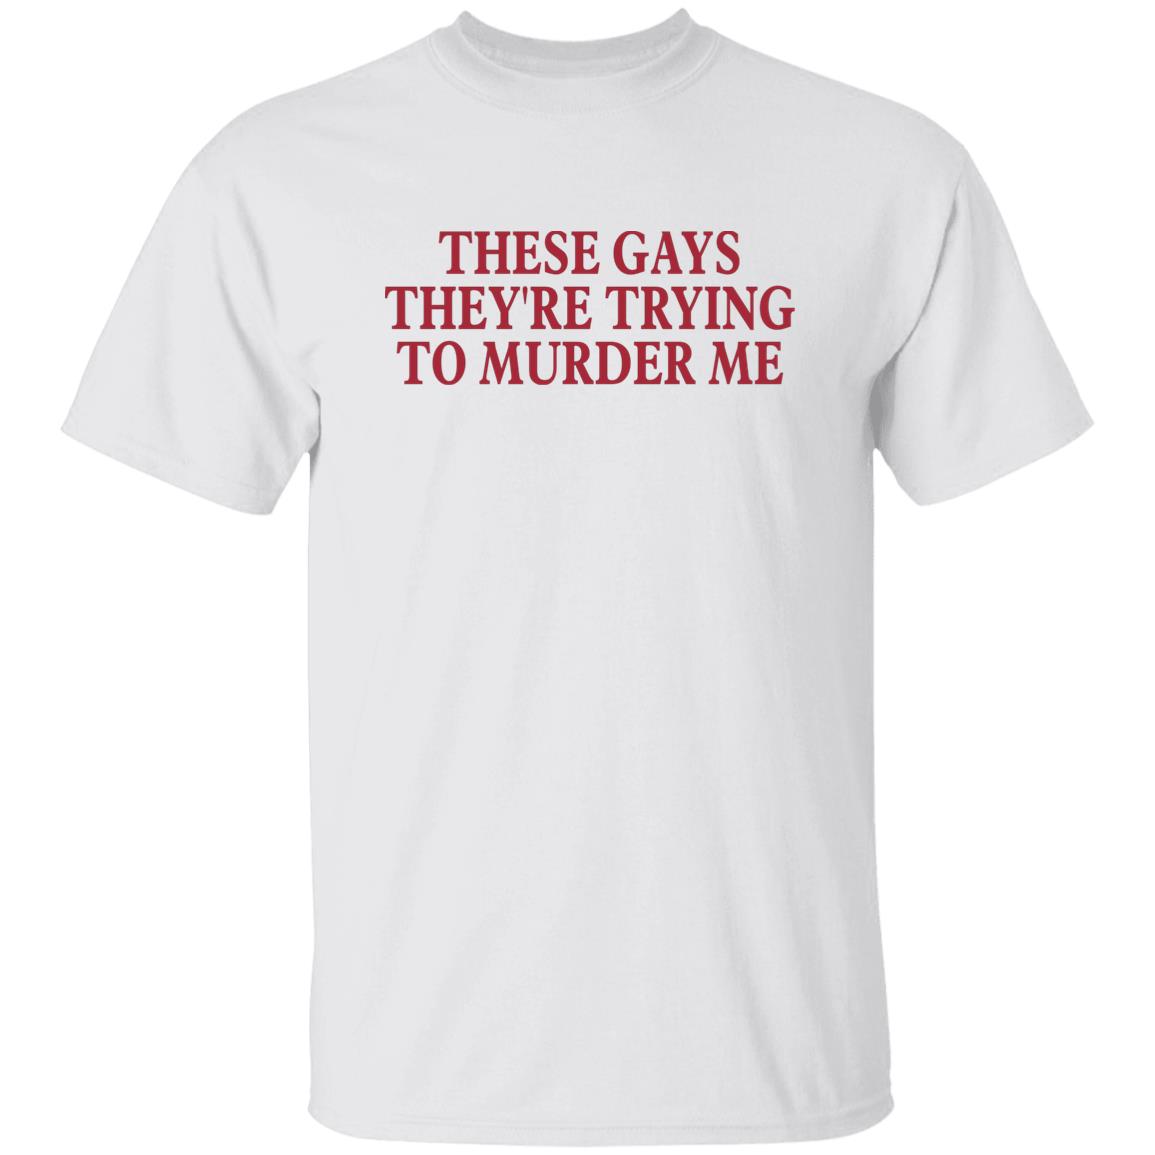 These Gays Theyre Trying To Murder Me Shirt